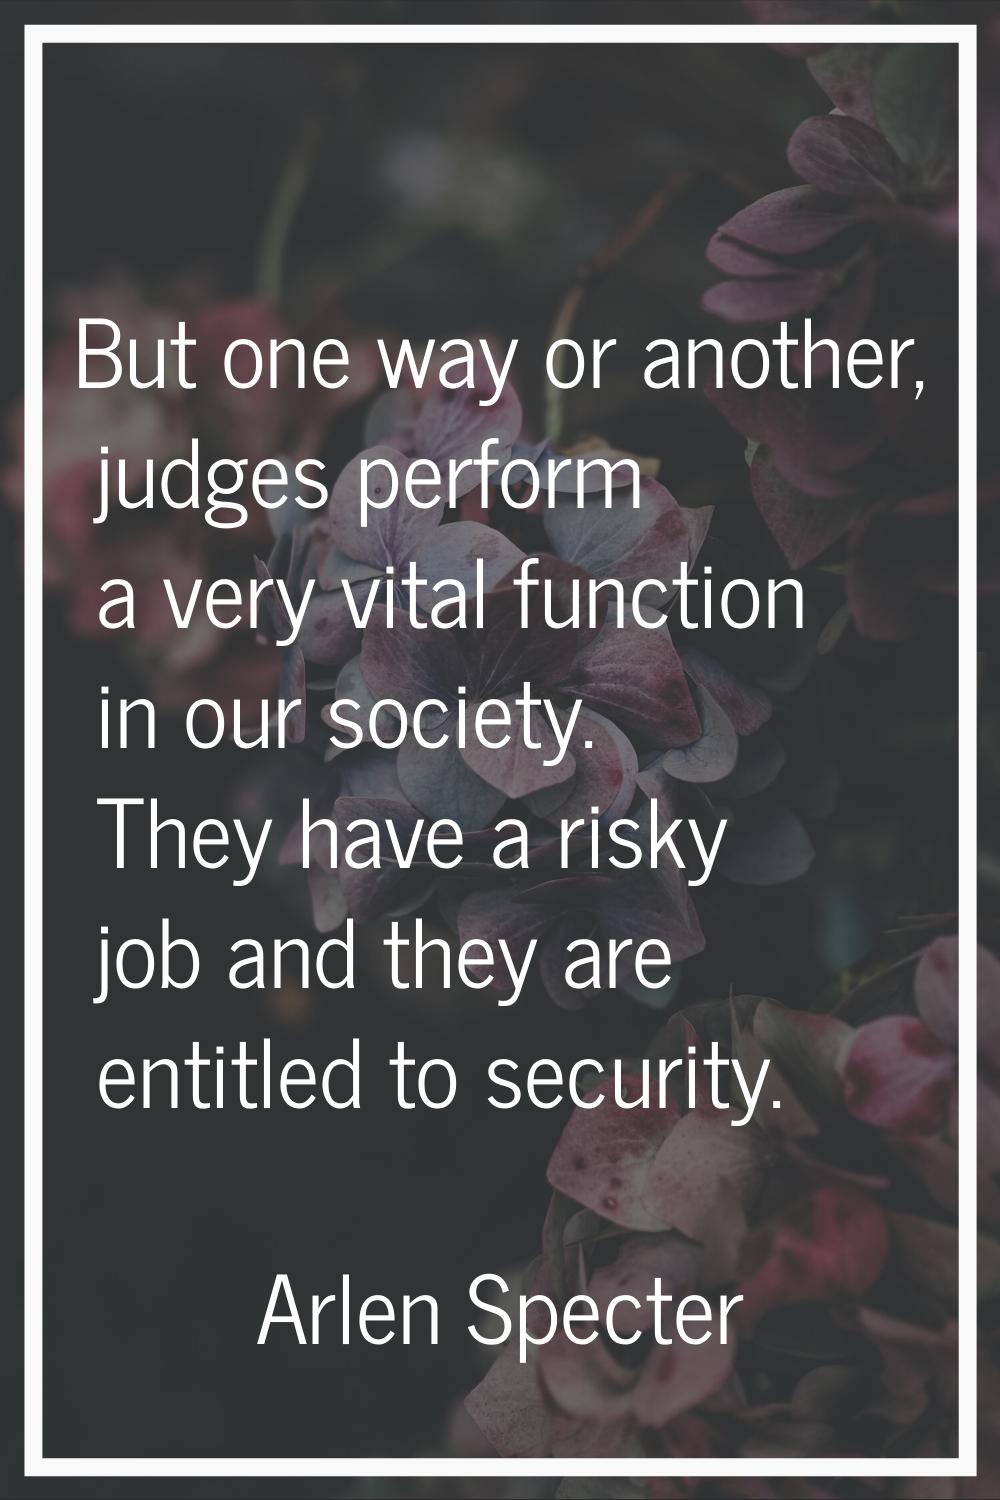 But one way or another, judges perform a very vital function in our society. They have a risky job 